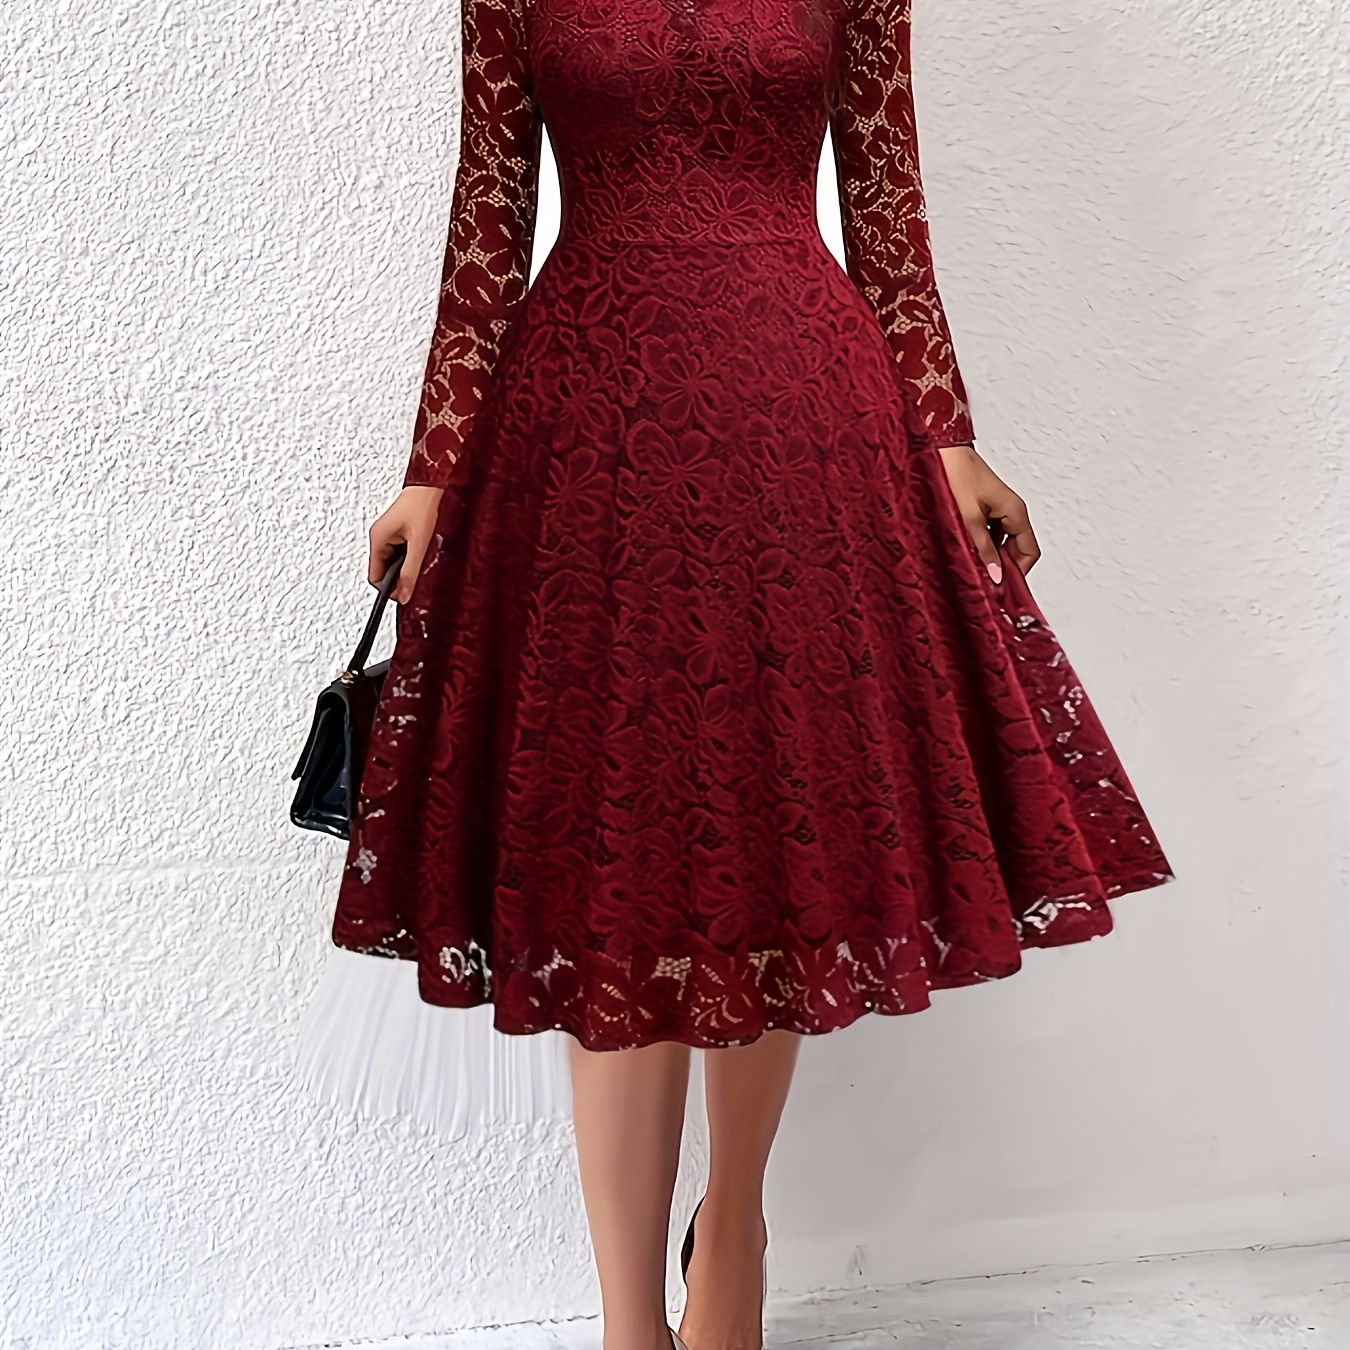 

Contrast Lace V Neck Big Swing Dress, Elegant Long Sleeve Dress For Party & Banquet, Women's Clothing